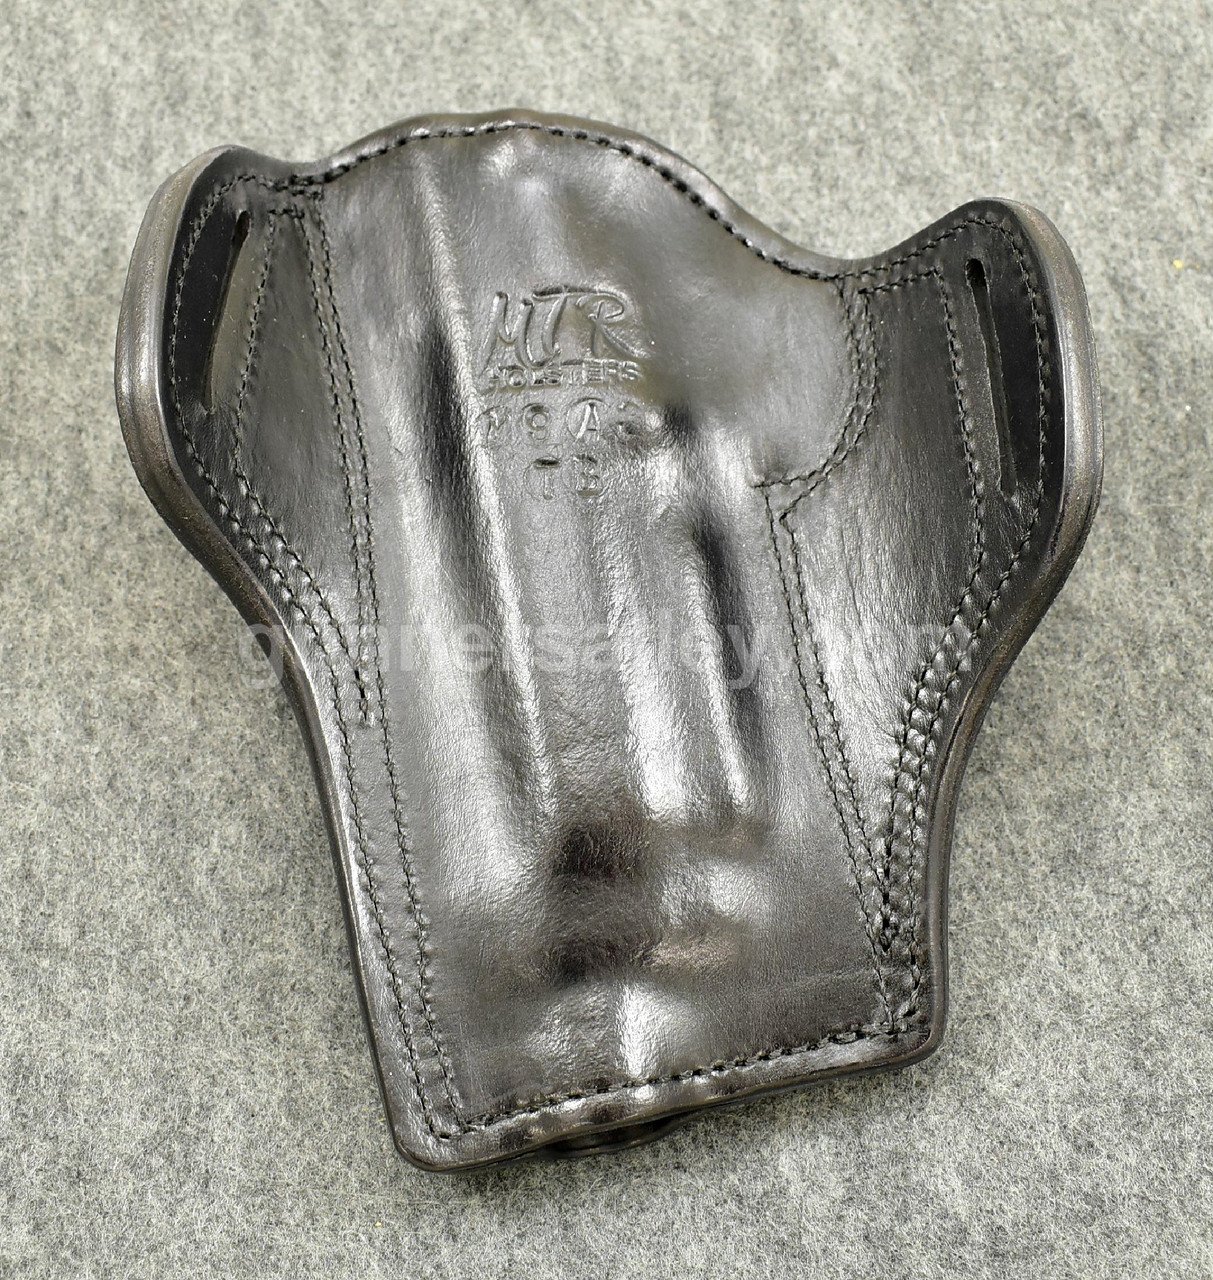 RH Black MTR Custom Slimline Deluxe Pancake Holster for a Beretta M9A3 with Threaded Barrel - Rear View